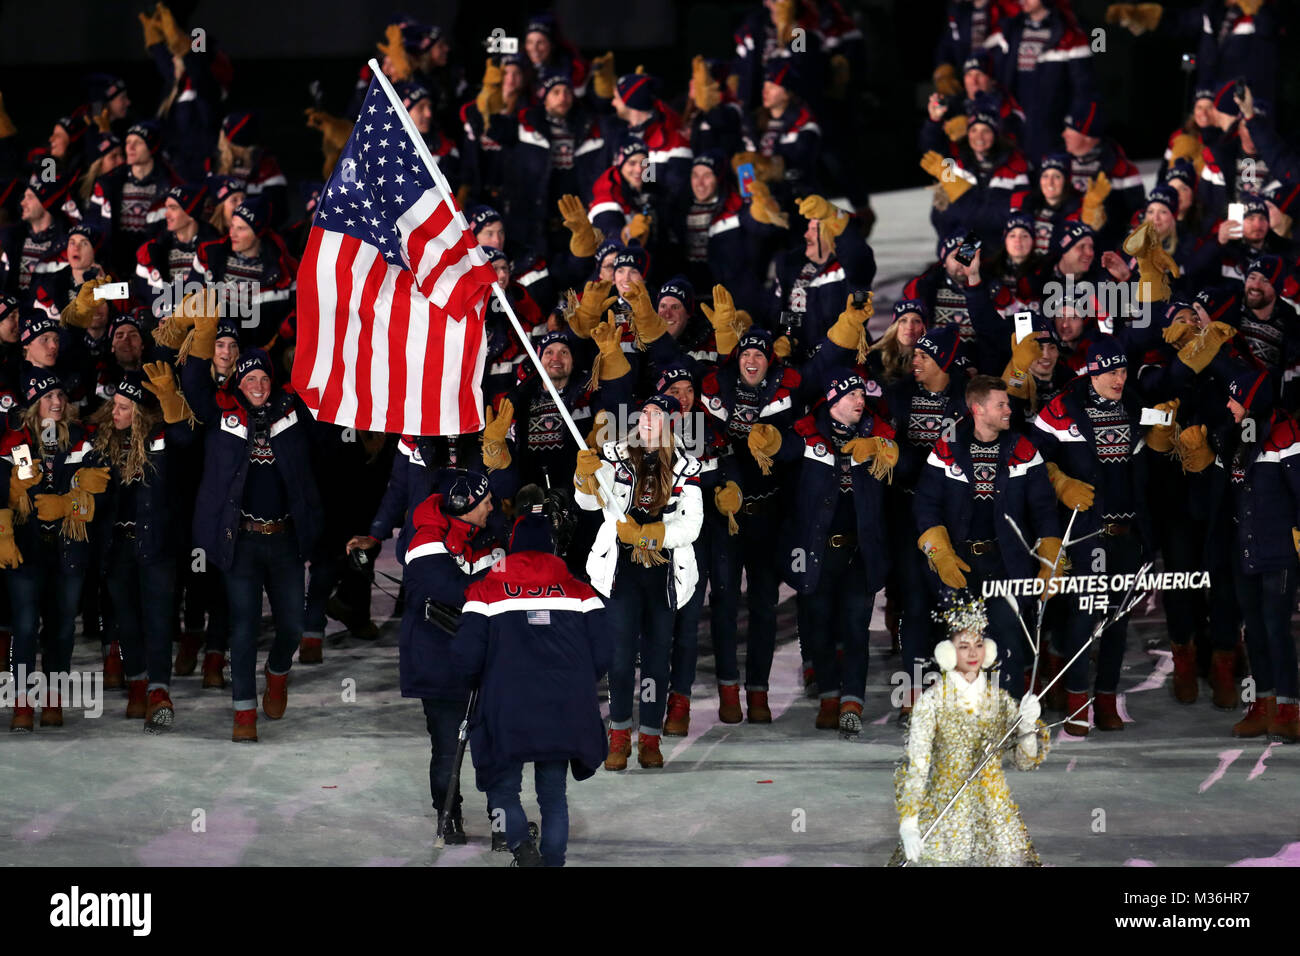 United States of America flag bearer Erin Hamlin leads out her team during the Opening Ceremony of the PyeongChang 2018 Winter Olympic Games at the PyeongChang Olympic Stadium in South Korea. Stock Photo